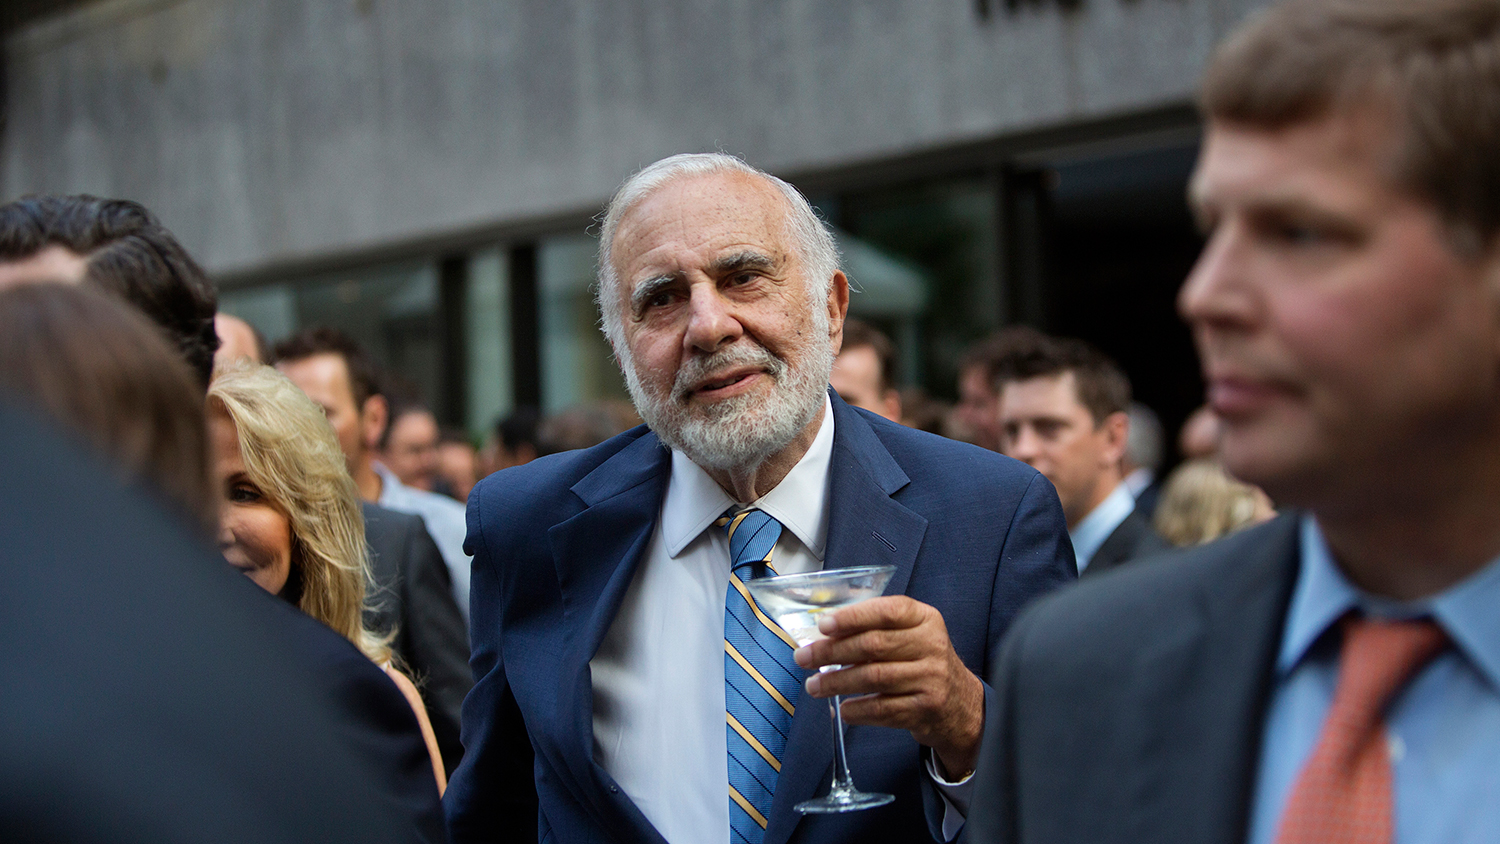 Billionaire activist investor Carl Icahn attends the Leveraged Finance Fights Melanoma charity event in New York on May 19, 2015.
